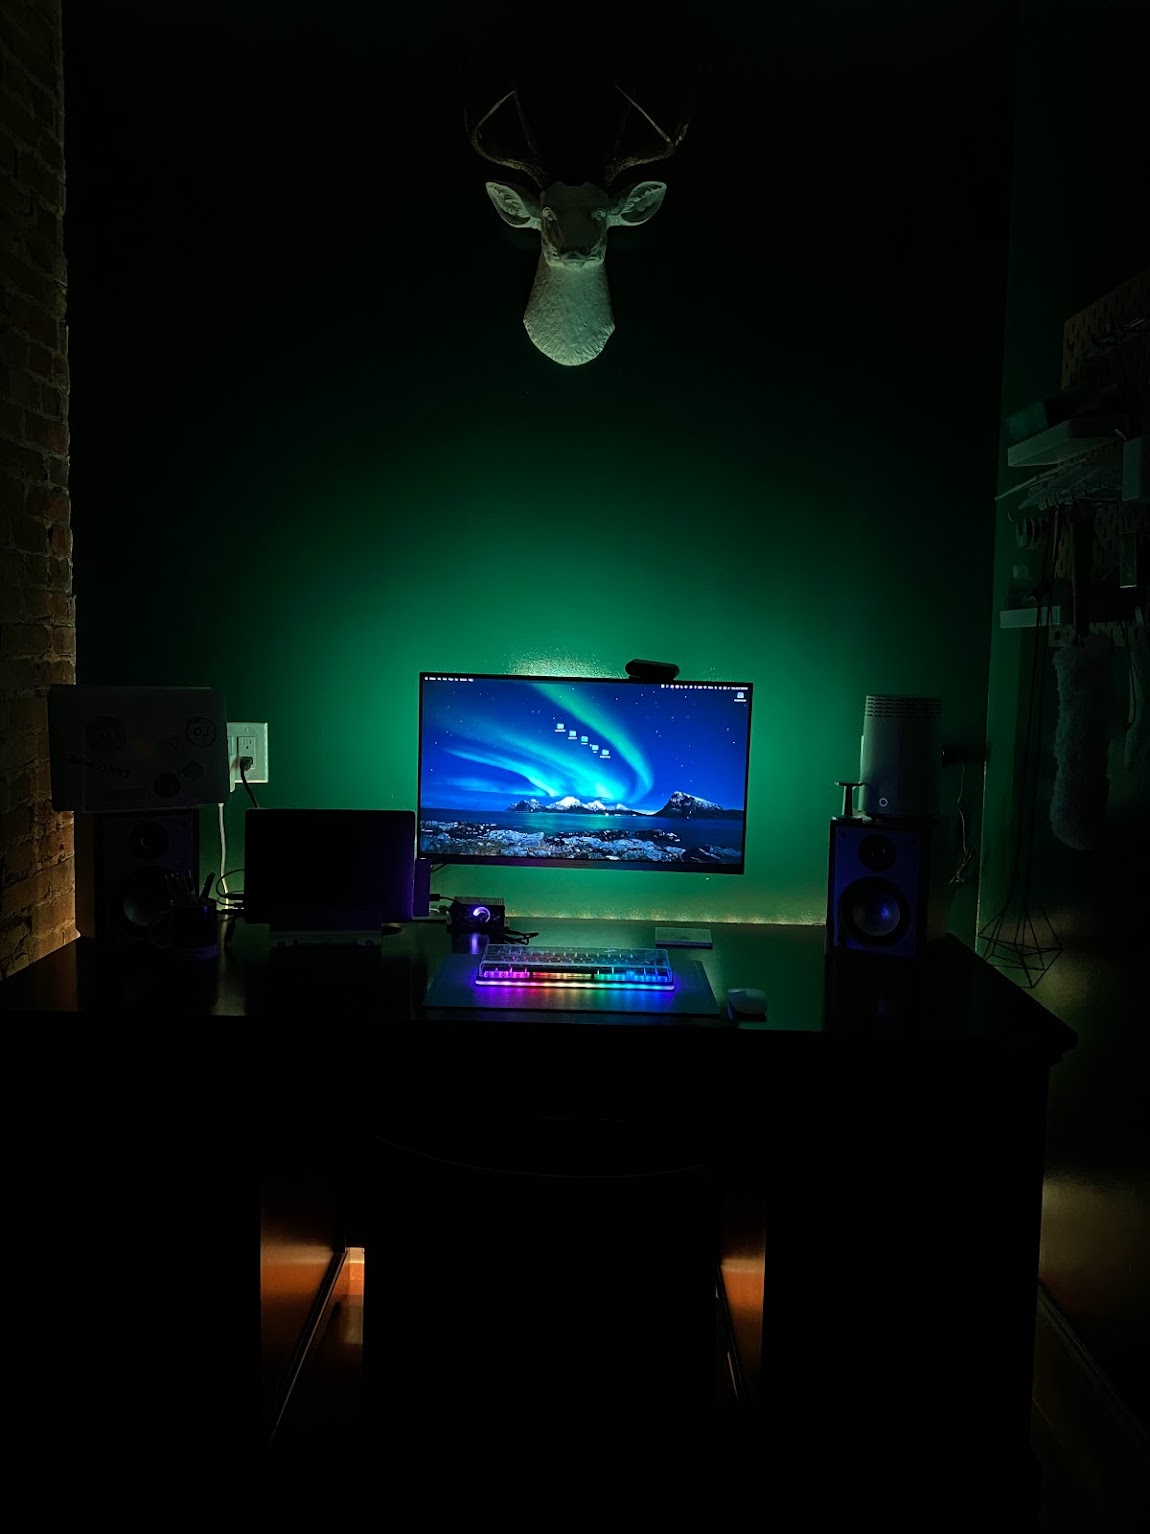 A dark and liminal room with a deep green wall on which hangs a fake white deer head with gold antlers; on the desk is a computer setup with a glowing, backlit monitor and mechanical keyboard